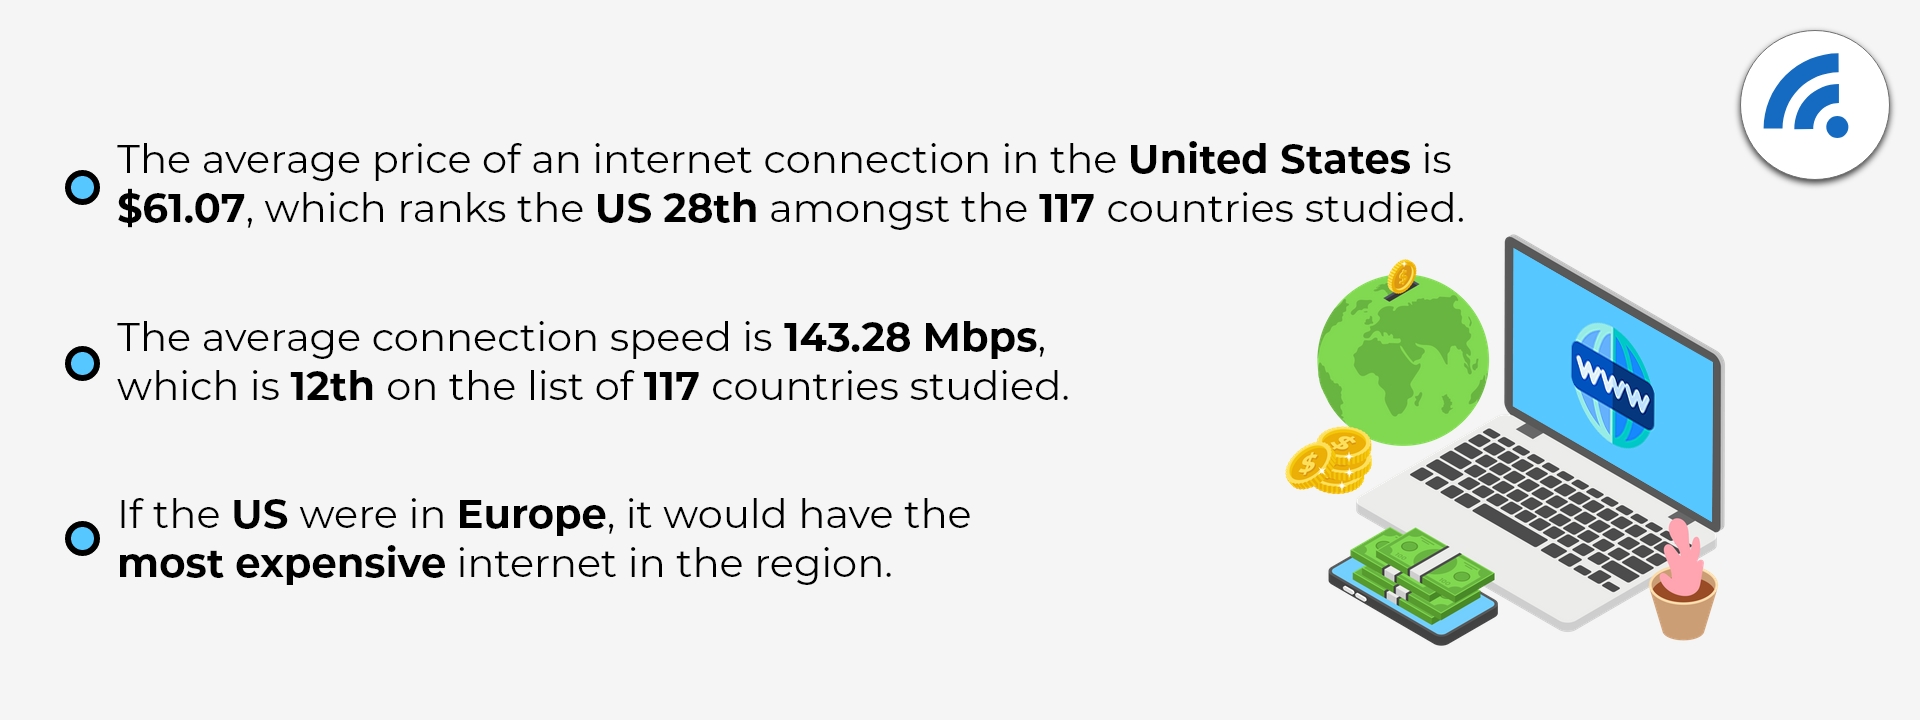 How Do U.S. Internet Costs Compare To The Rest Of The World?